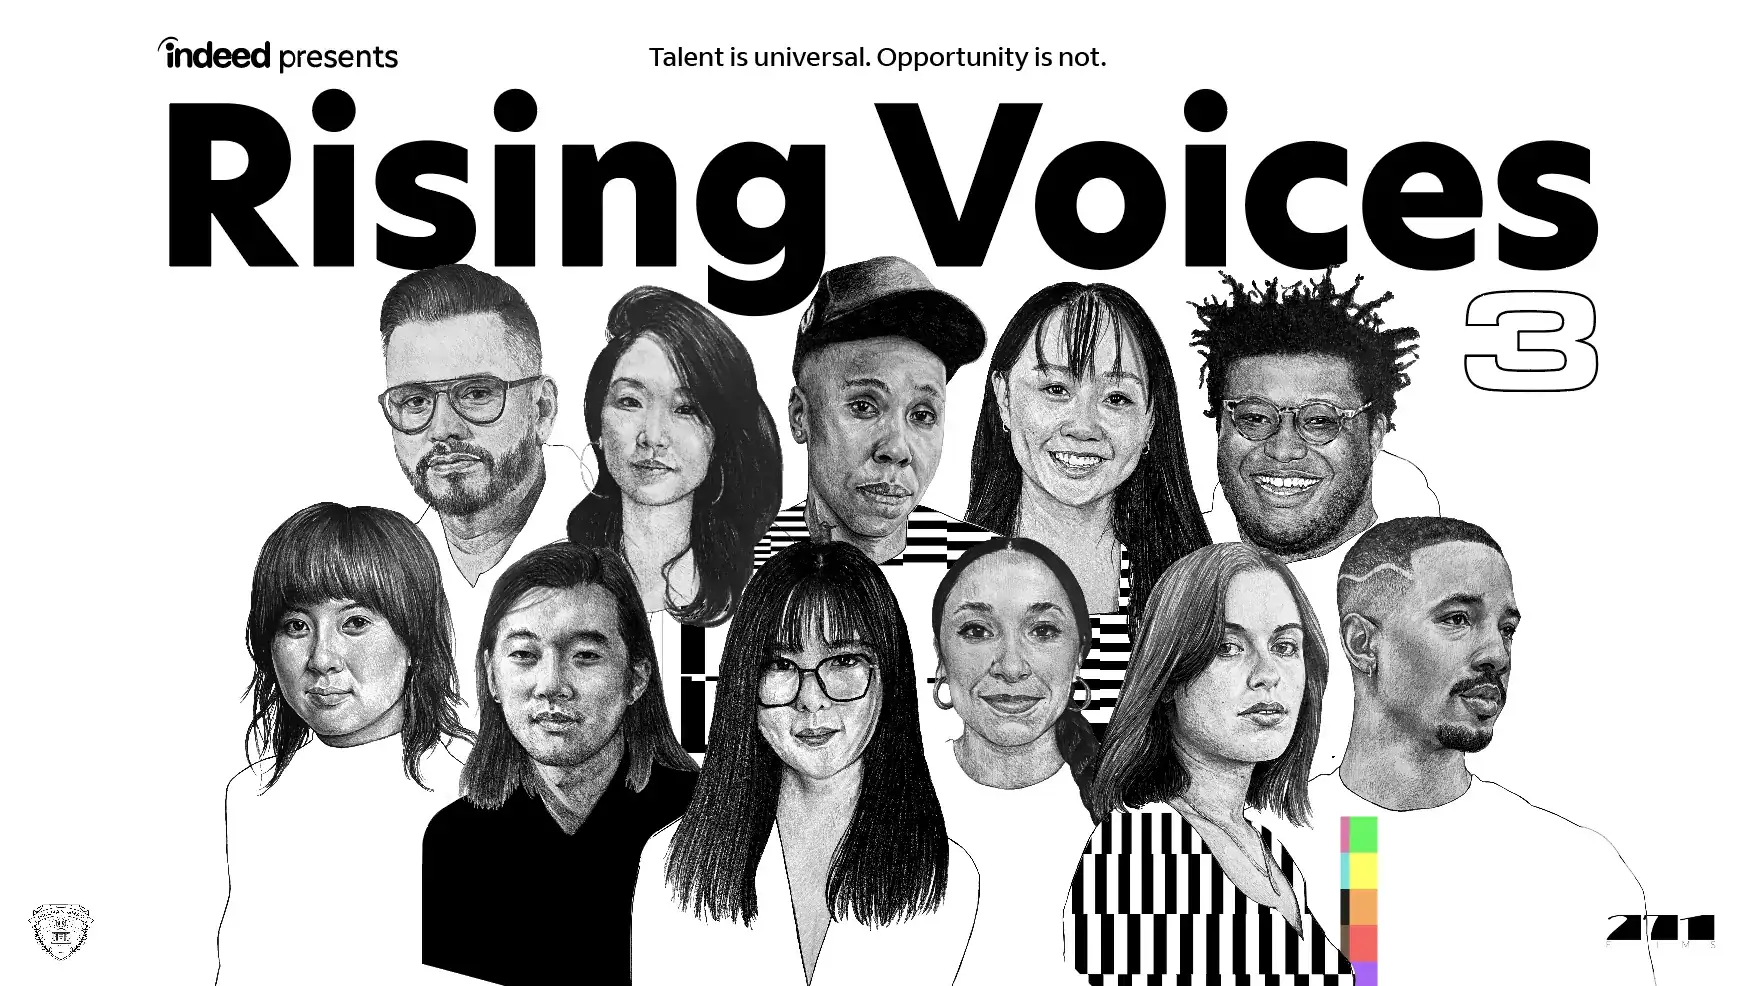 Portrait of 11 people by Princess Spencer and text talent is universal, opportunity is not, Indeed presents Rising Voices 3